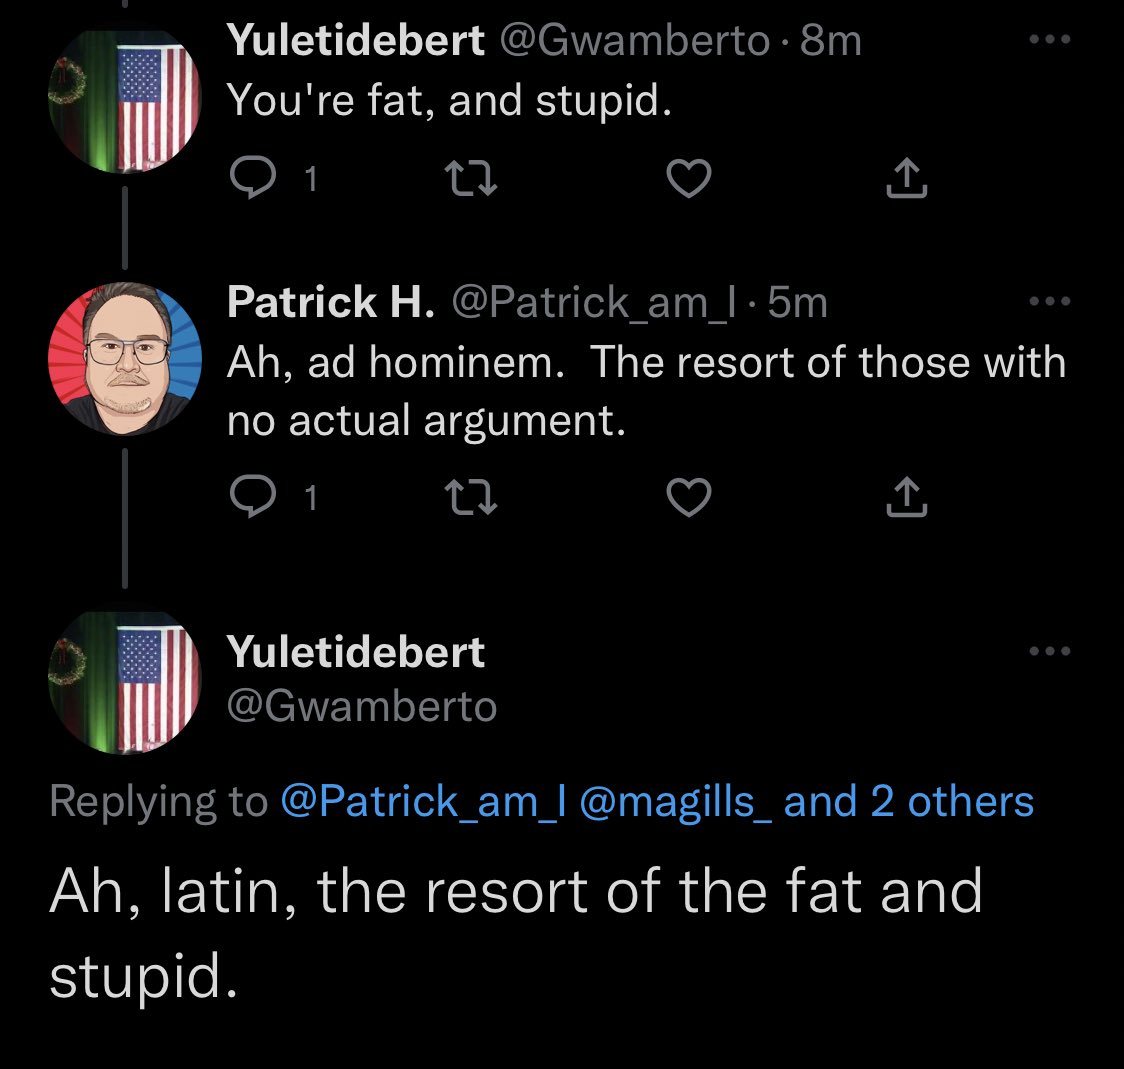 @Gwamberto @Patrick_am_I @gabrielmalor @DrJBhattacharya This is the greatest exchange I’ve ever had in my replies